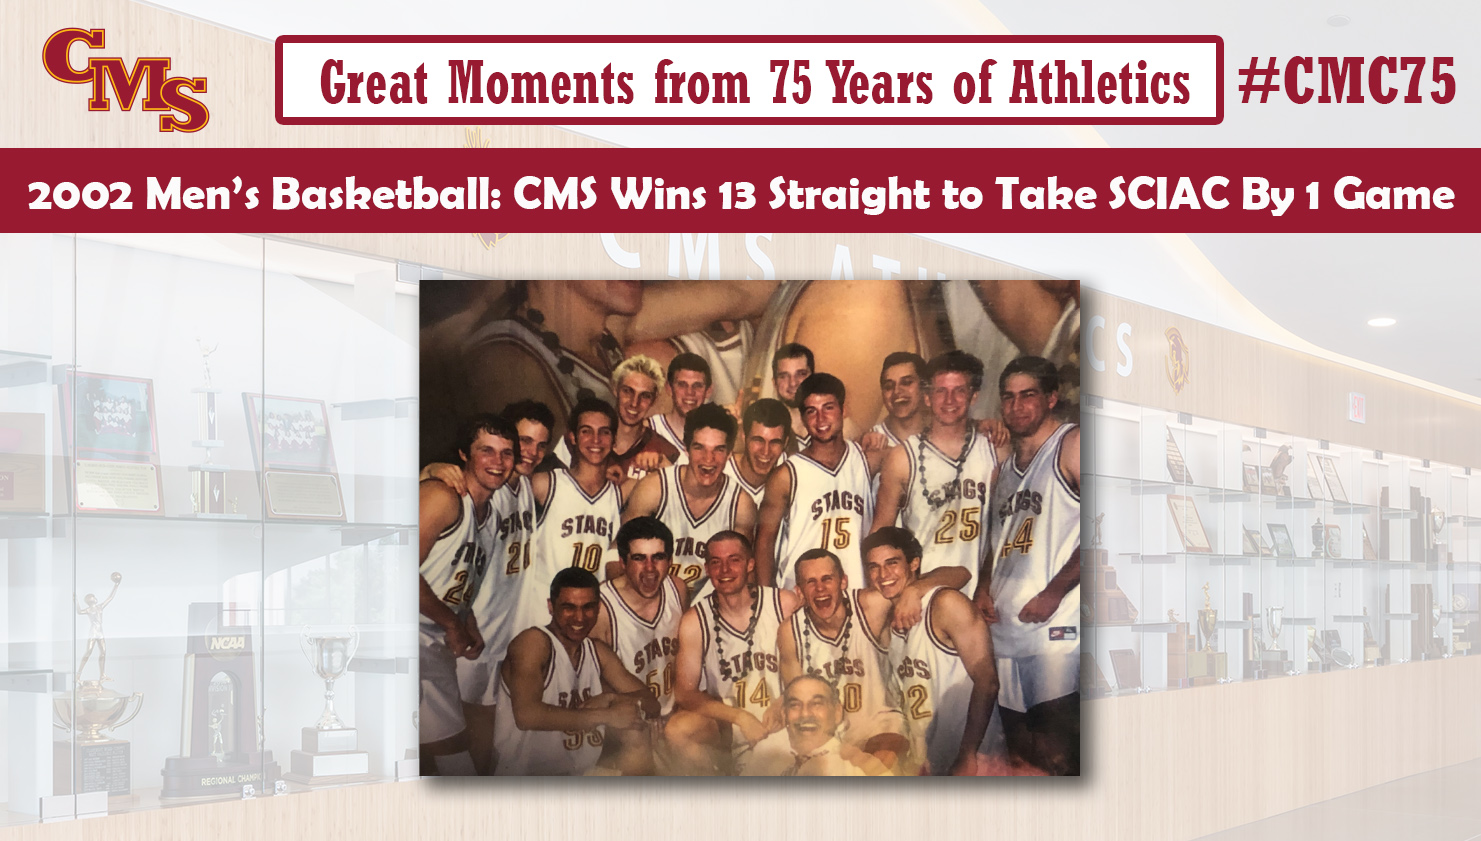 The 2002 men's basketball team celebrating after a SCIAC title. Words over the photo read: Great Moments in 75 Years of Athletics. 2002 Men's Basketball: Stags win 13 Straight to take SCIAC by one game